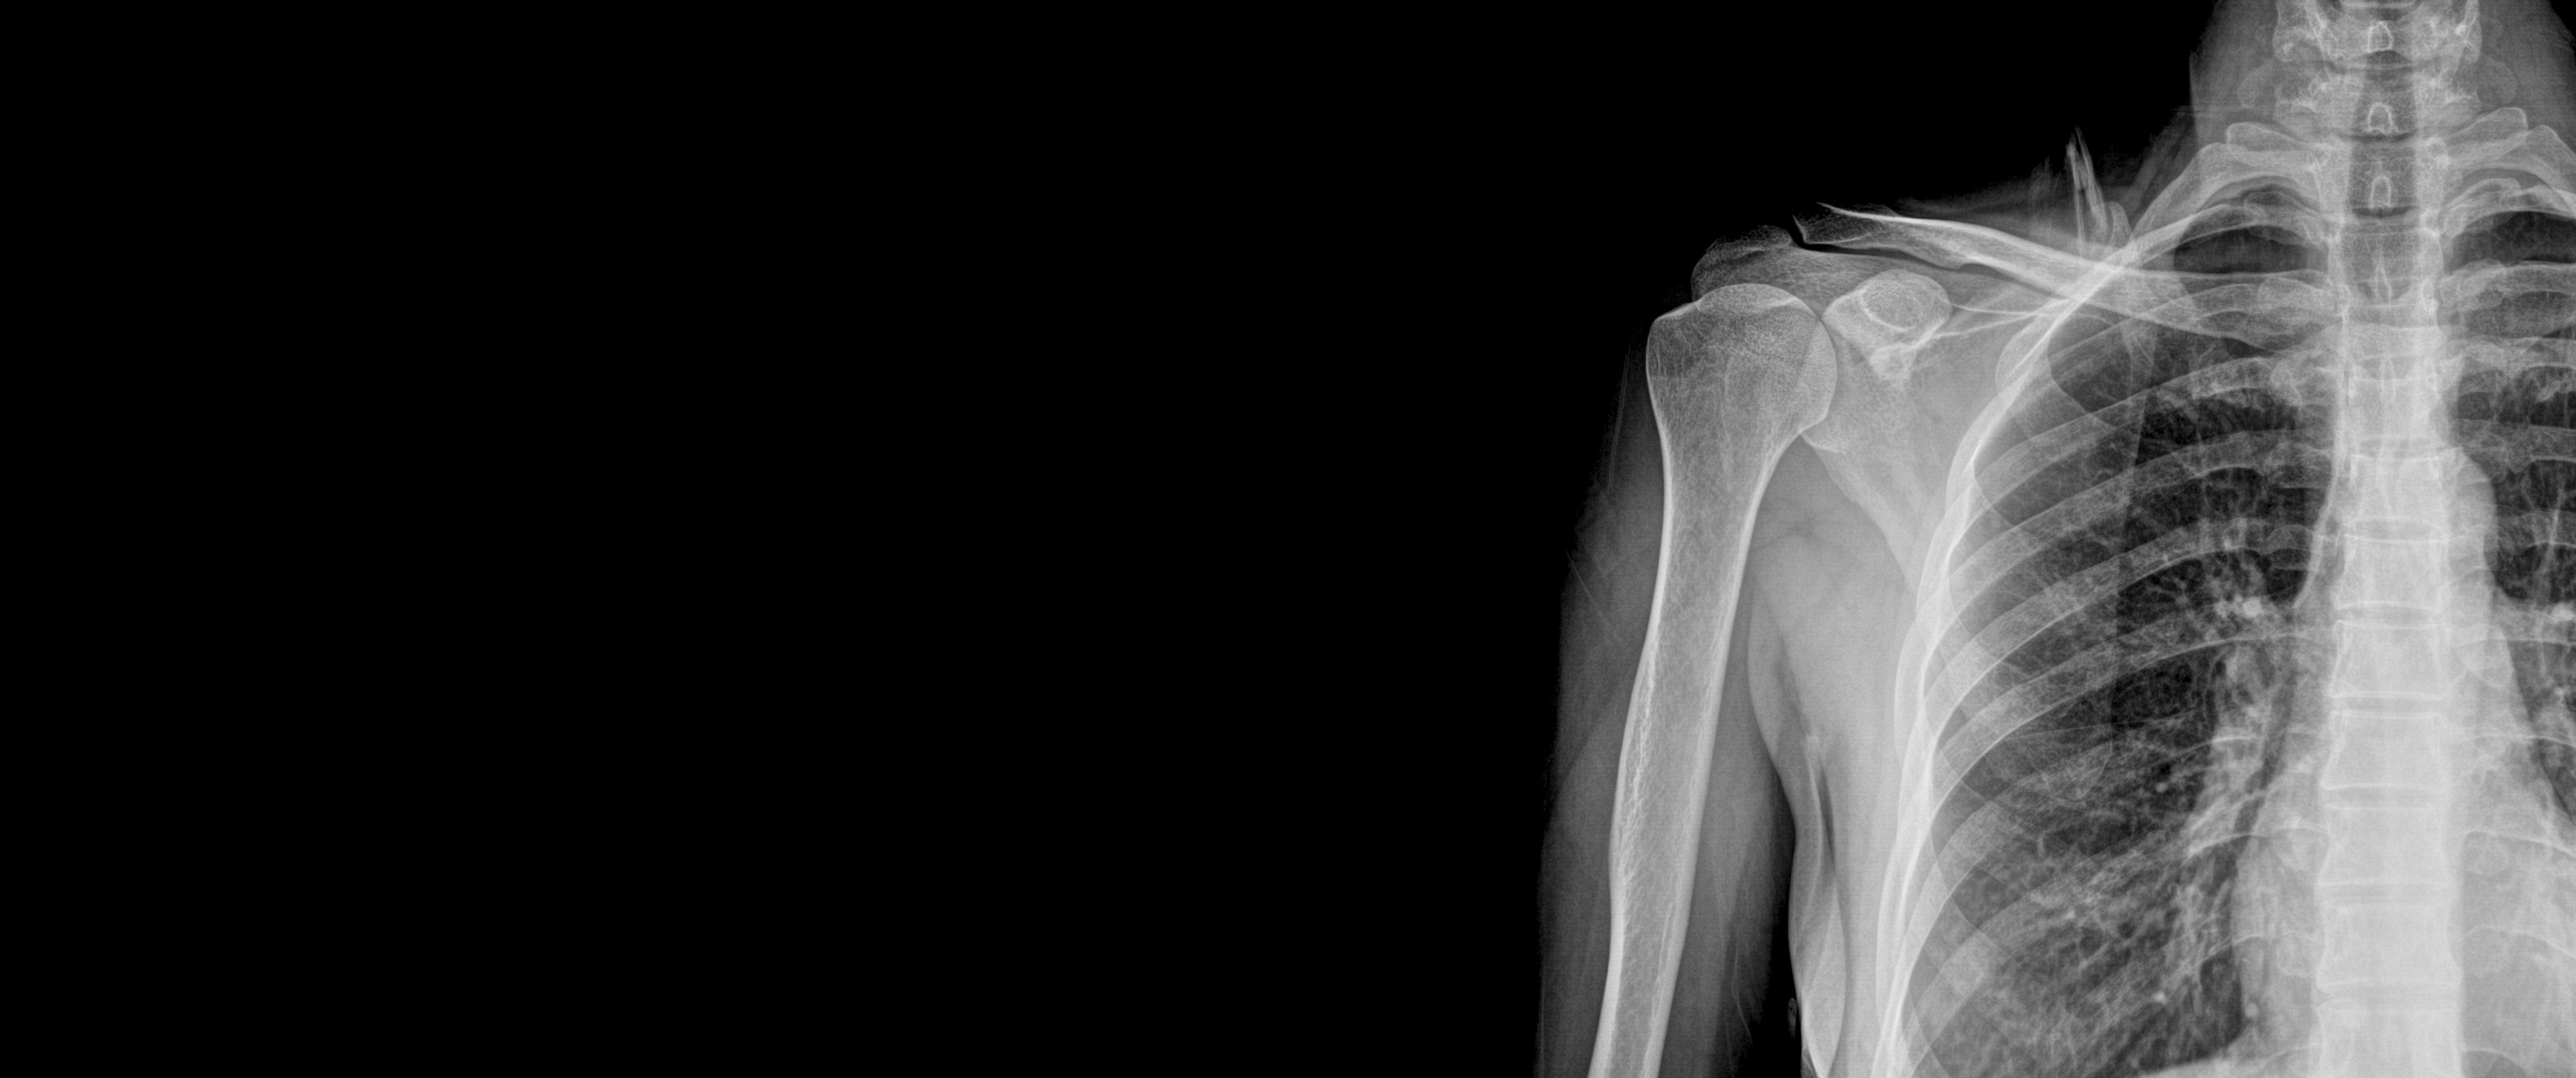 x ray wallpaper, shoulder, radiography, joint, x ray, radiology, medical imaging, arm, neck, black and white, human body